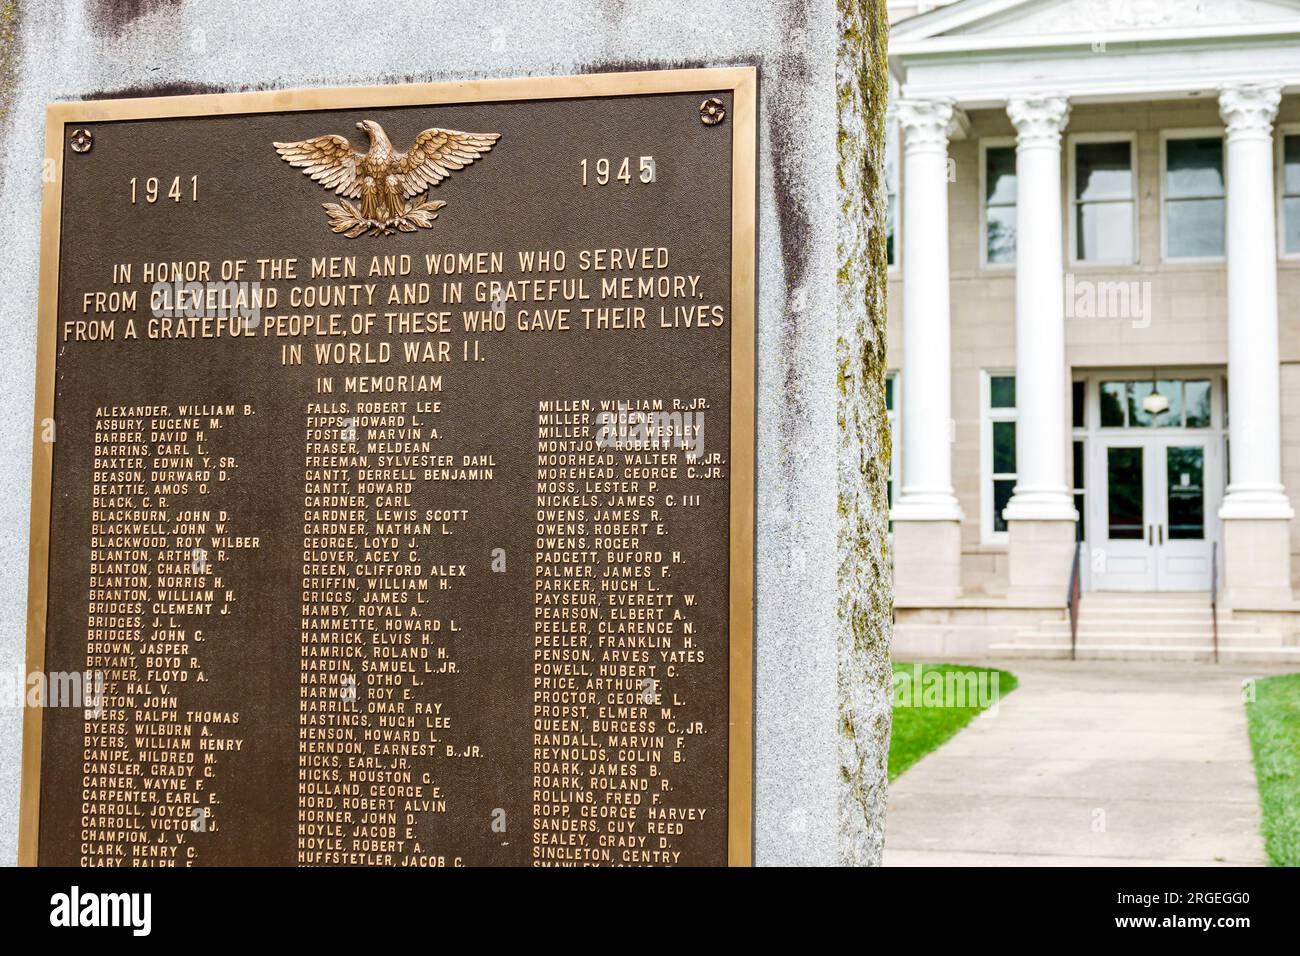 Shelby North Carolina,World War II memorial brass plaque gave lives,historic Cleveland County Courthouse court house,outside exterior,building front e Stock Photo